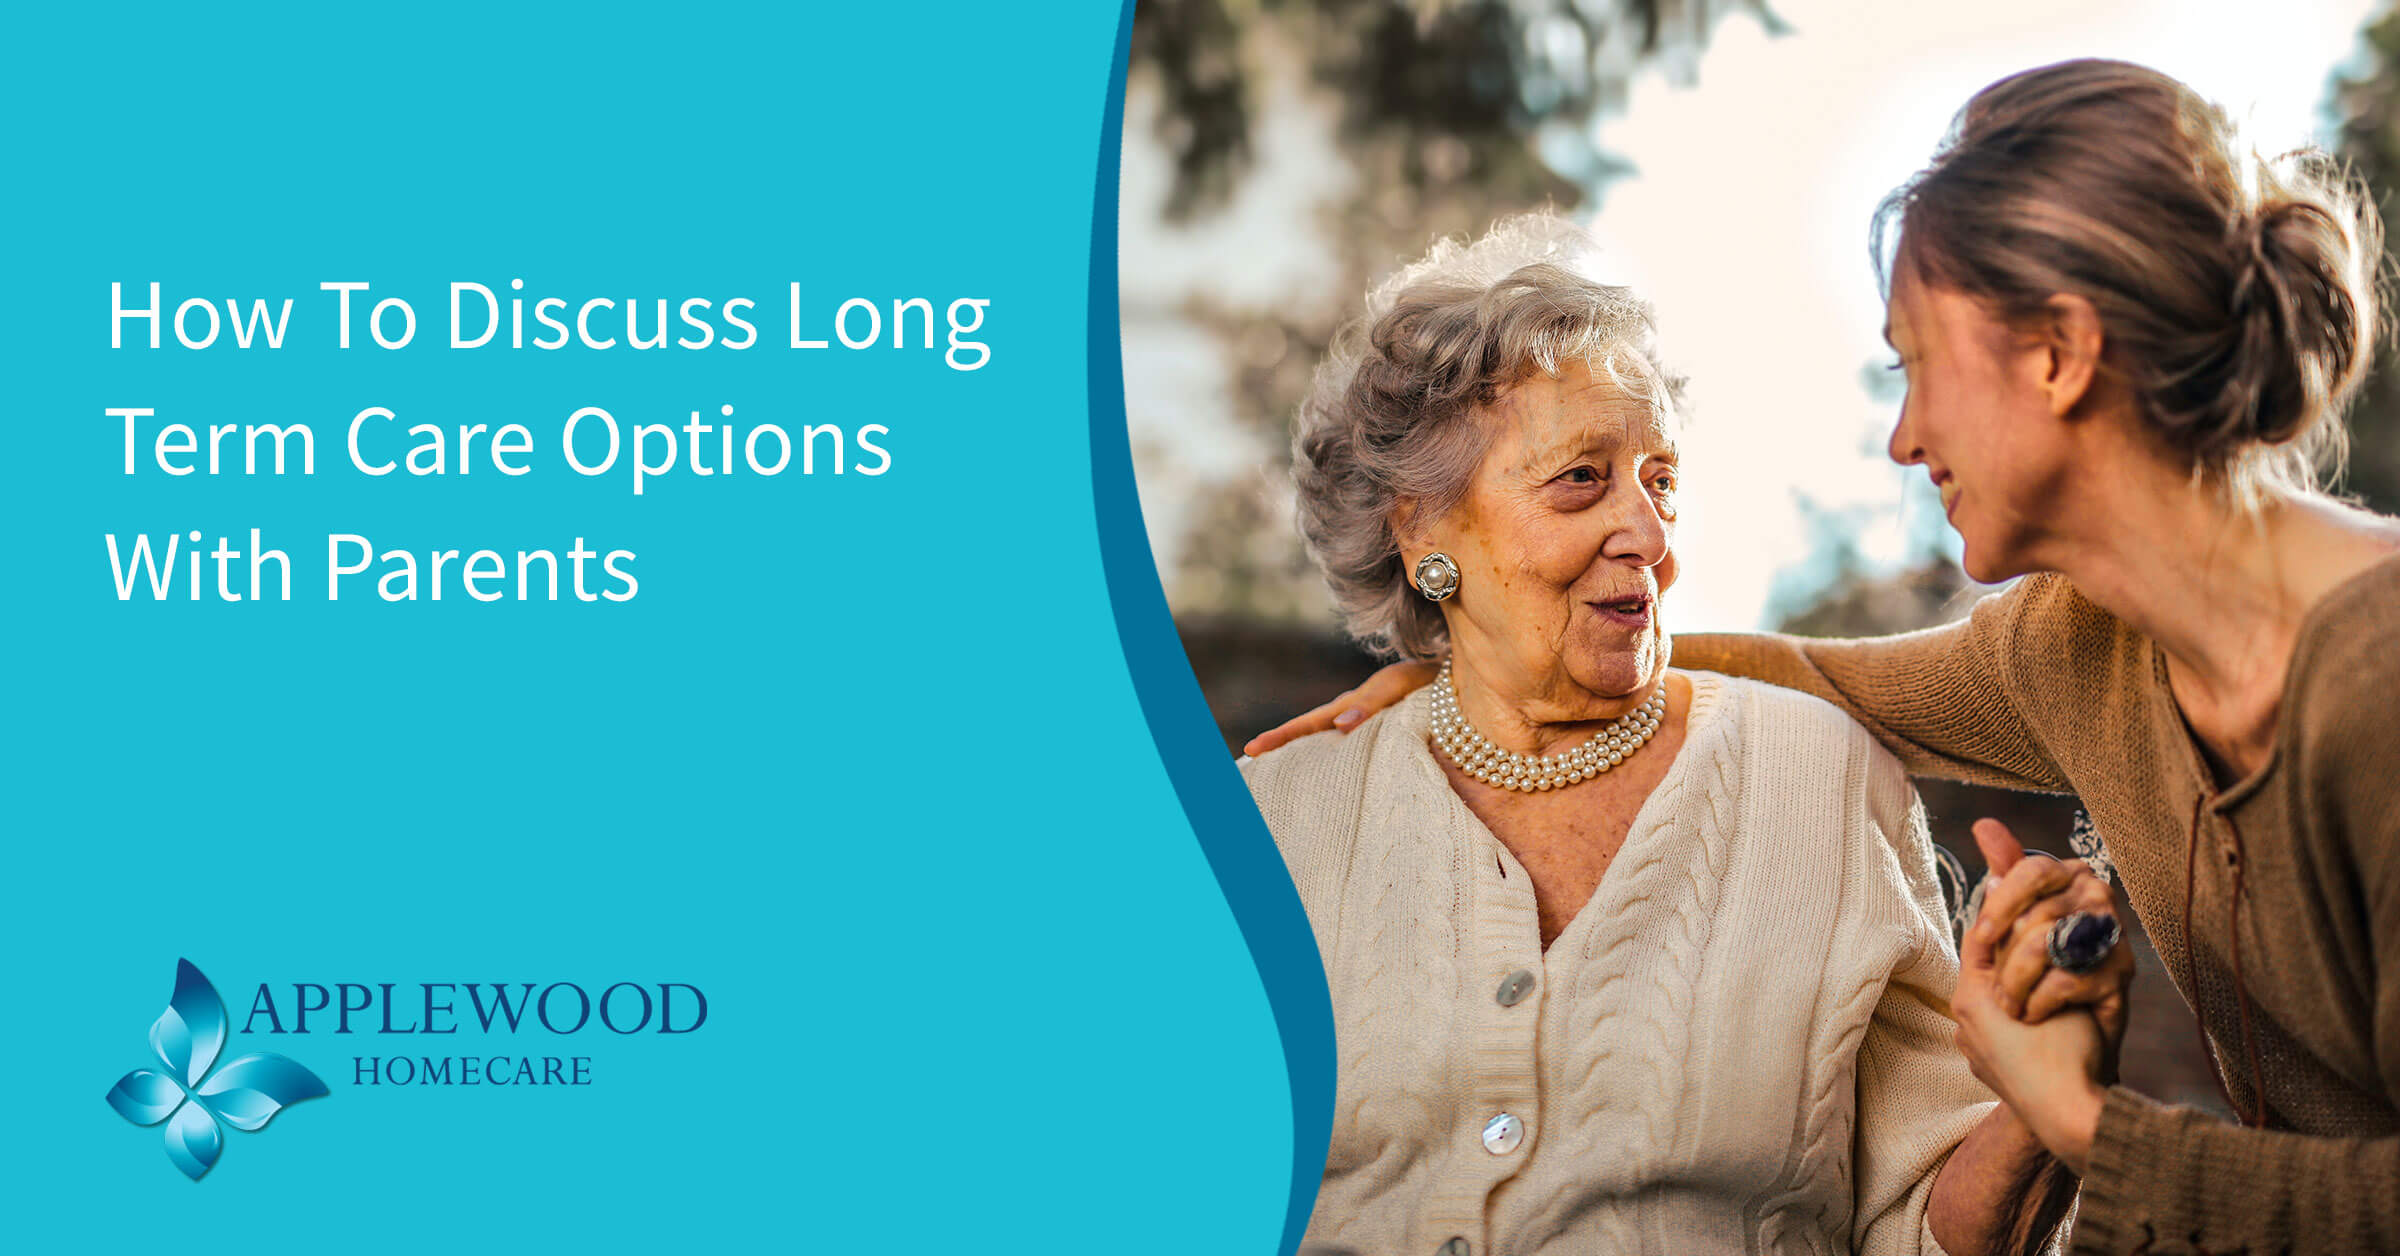 How To Discuss Long Term Care Options With Parents